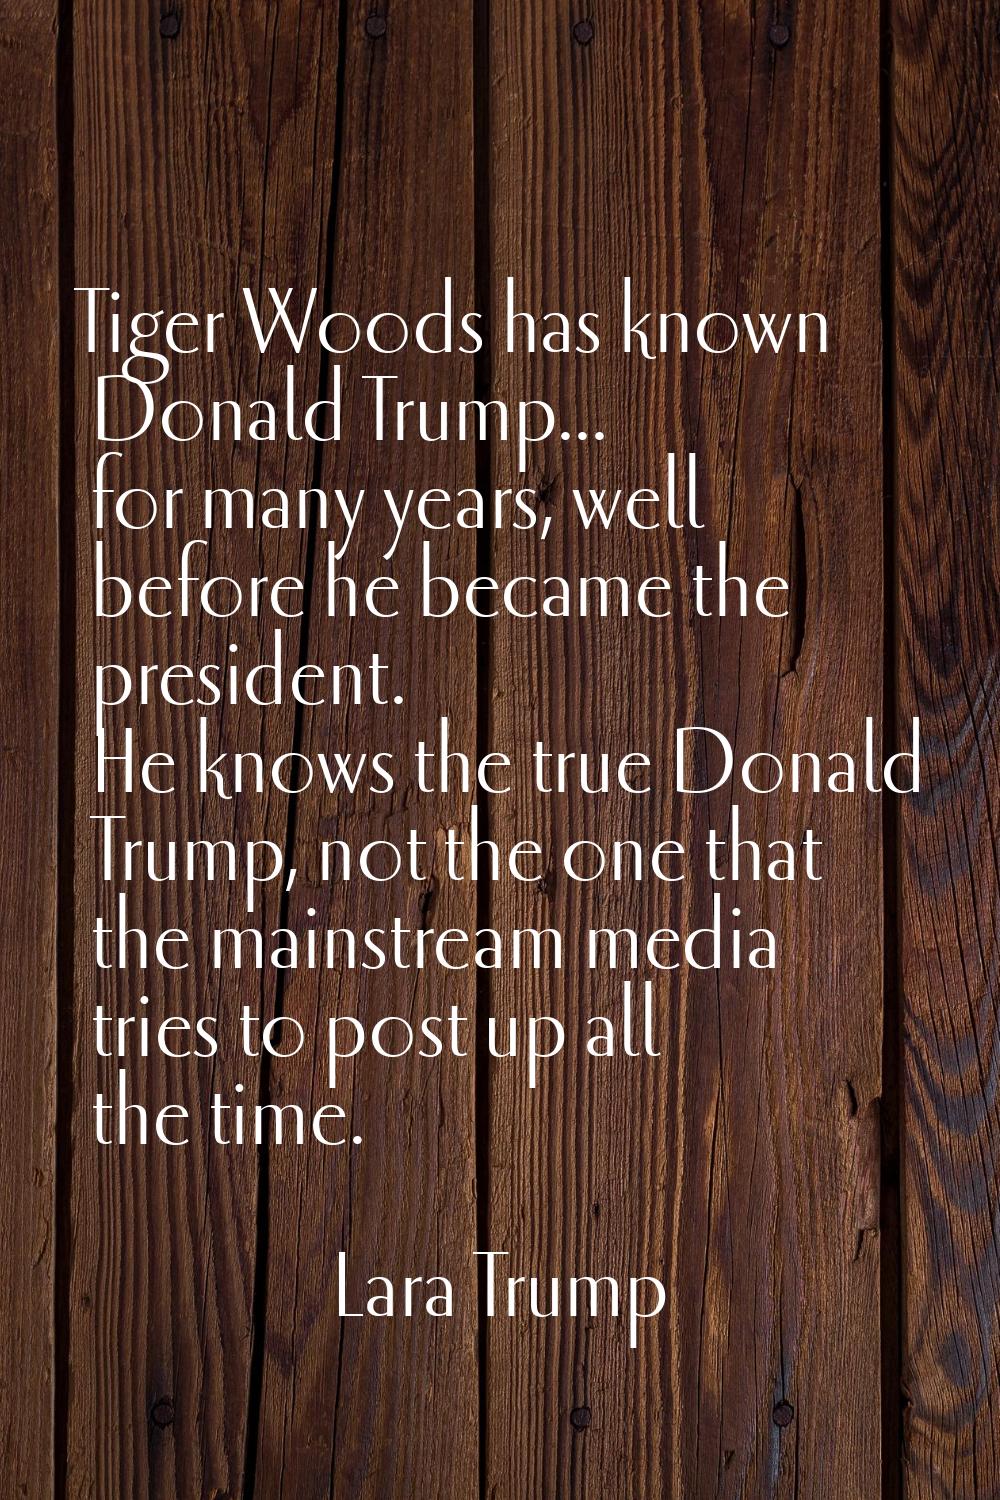 Tiger Woods has known Donald Trump... for many years, well before he became the president. He knows